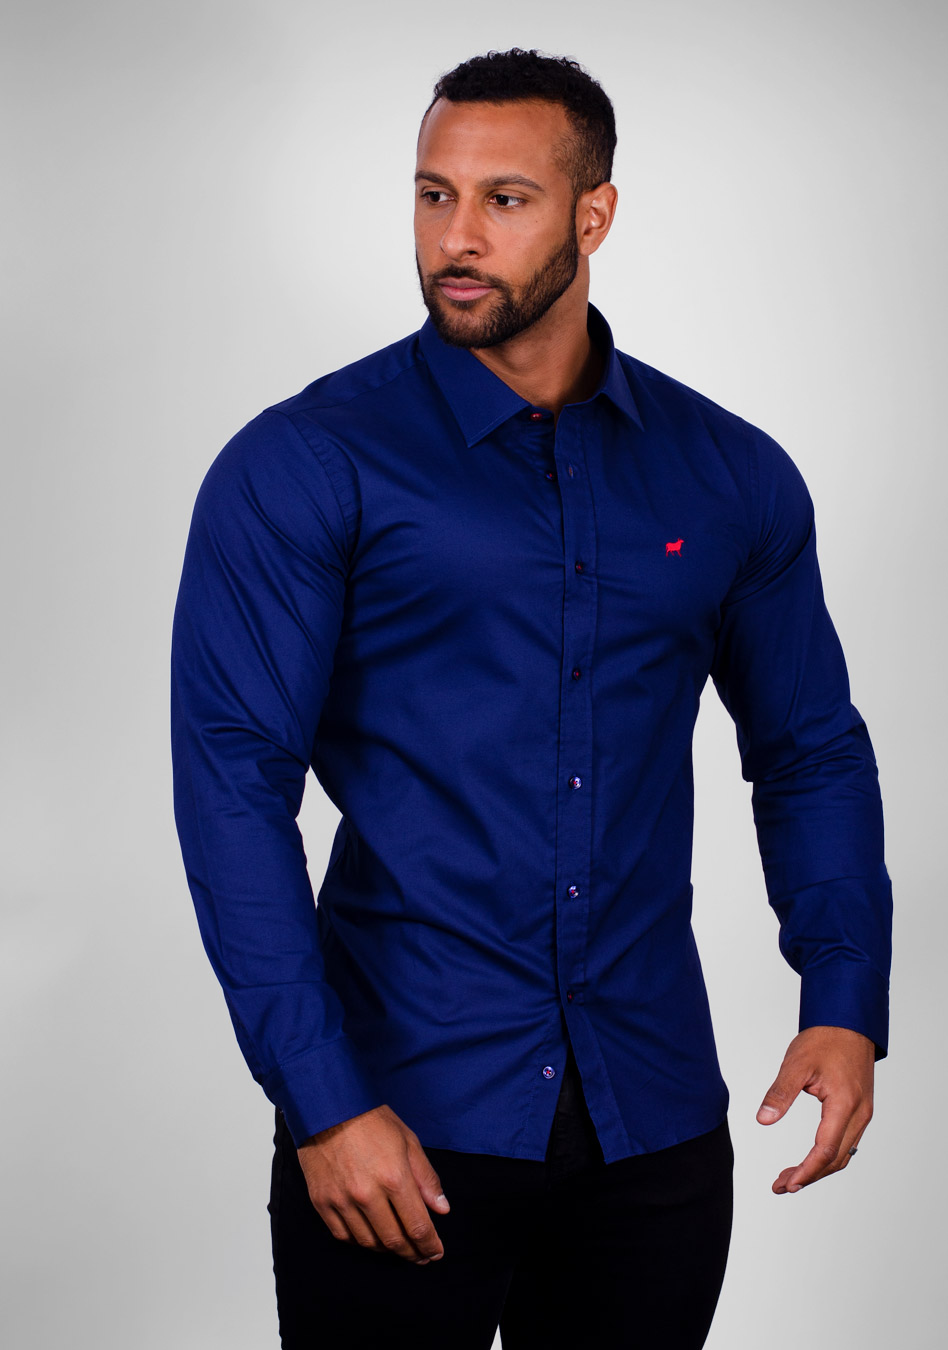 Deep blue muscle fit shirt on an athletically built model, showcasing the athletic fit design that enhances physique, with stretch fabric for comfort and mobility